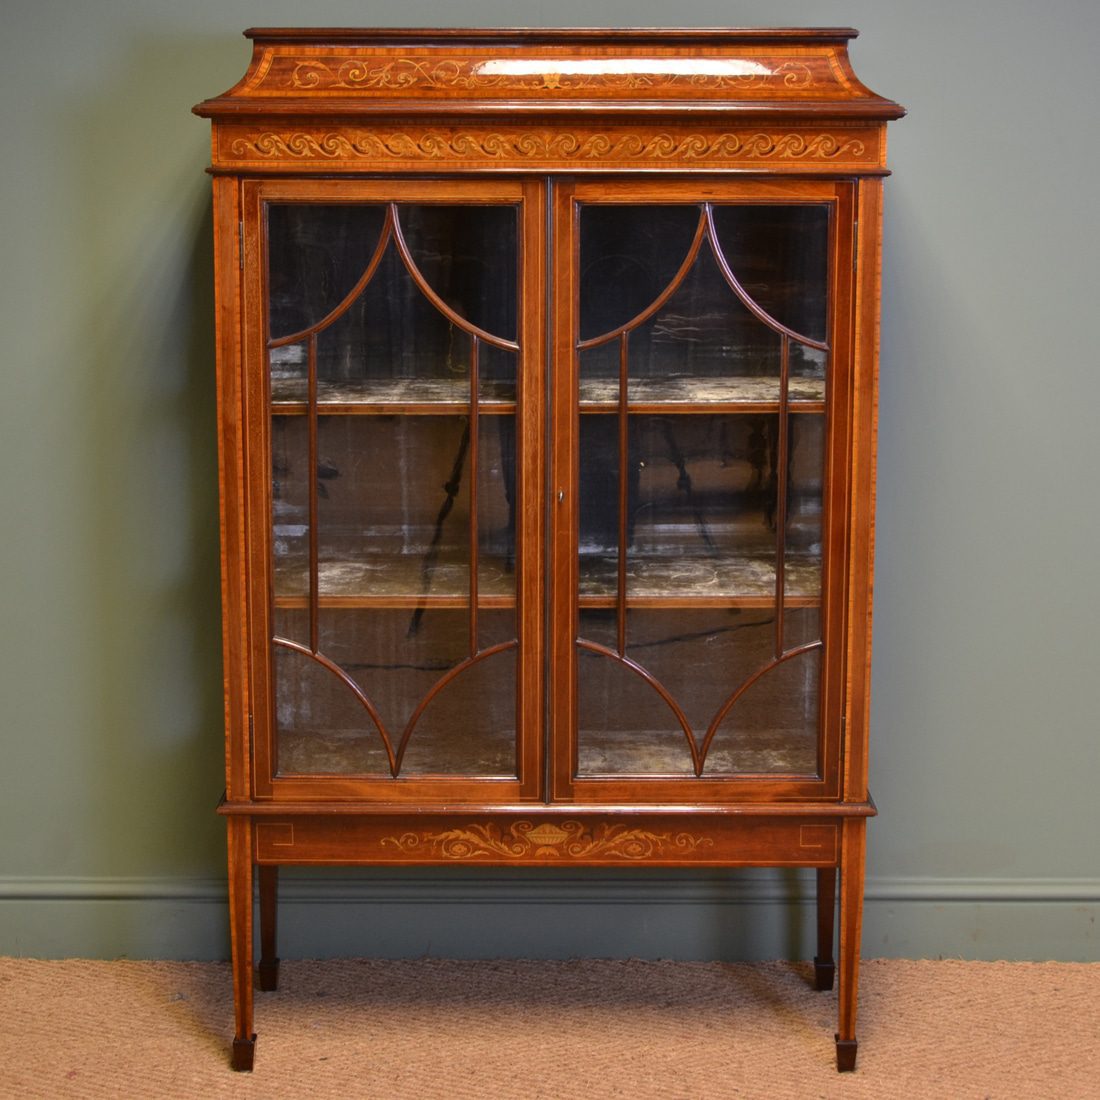 Spectacular Exhibition Quality Maple & Co Inlaid Mahogany Antique Display Cabinet